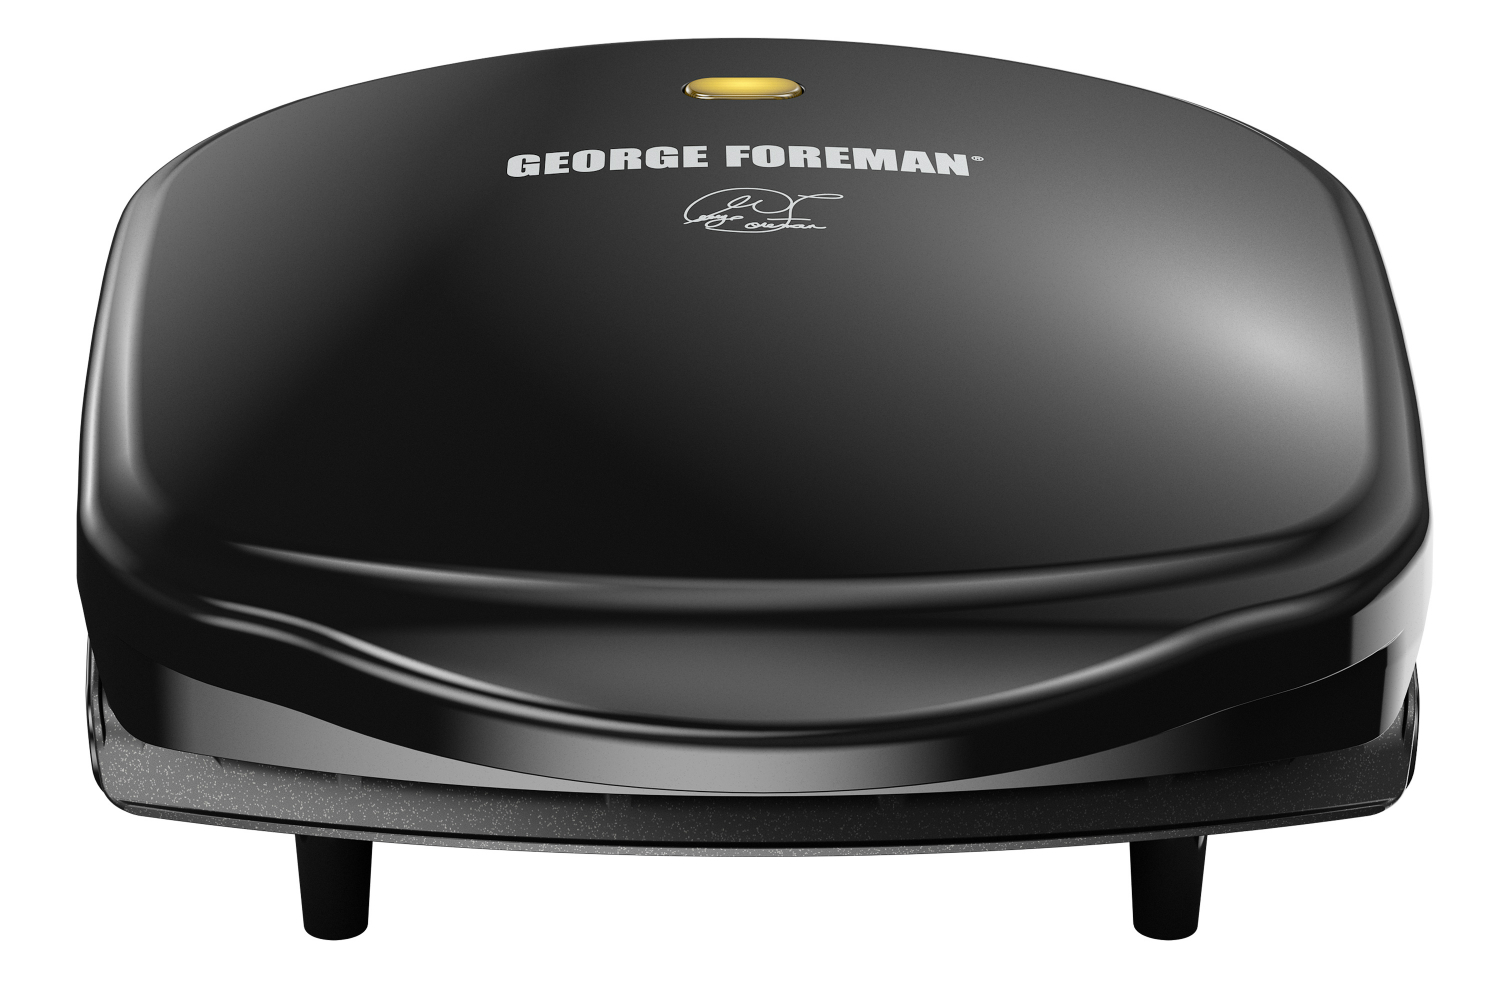 Walmart Sears the Prices for George Foreman Electric Grills and